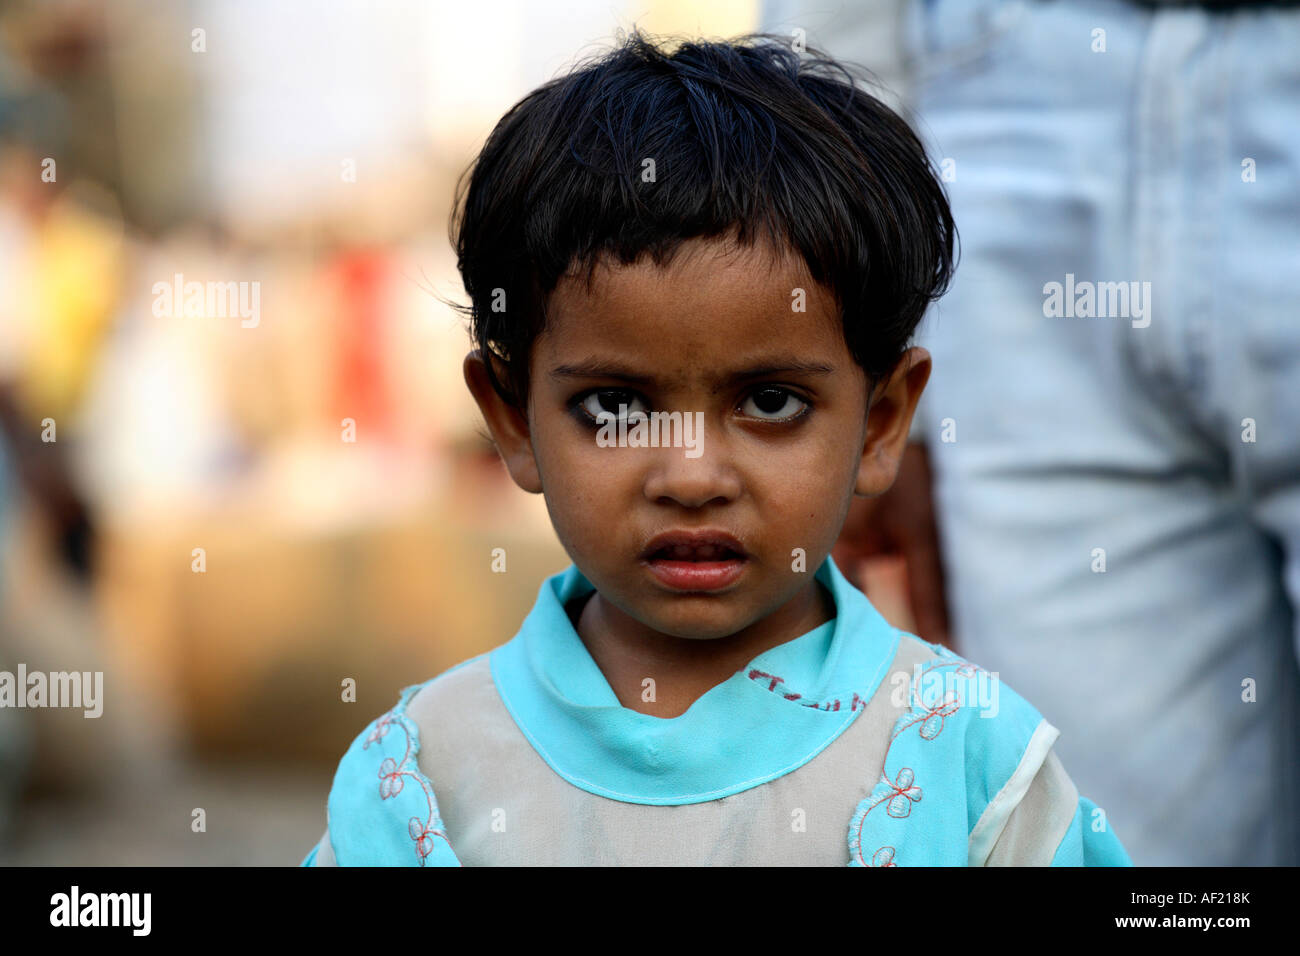 Young Indian child at railway station, Pune, India Stock Photo